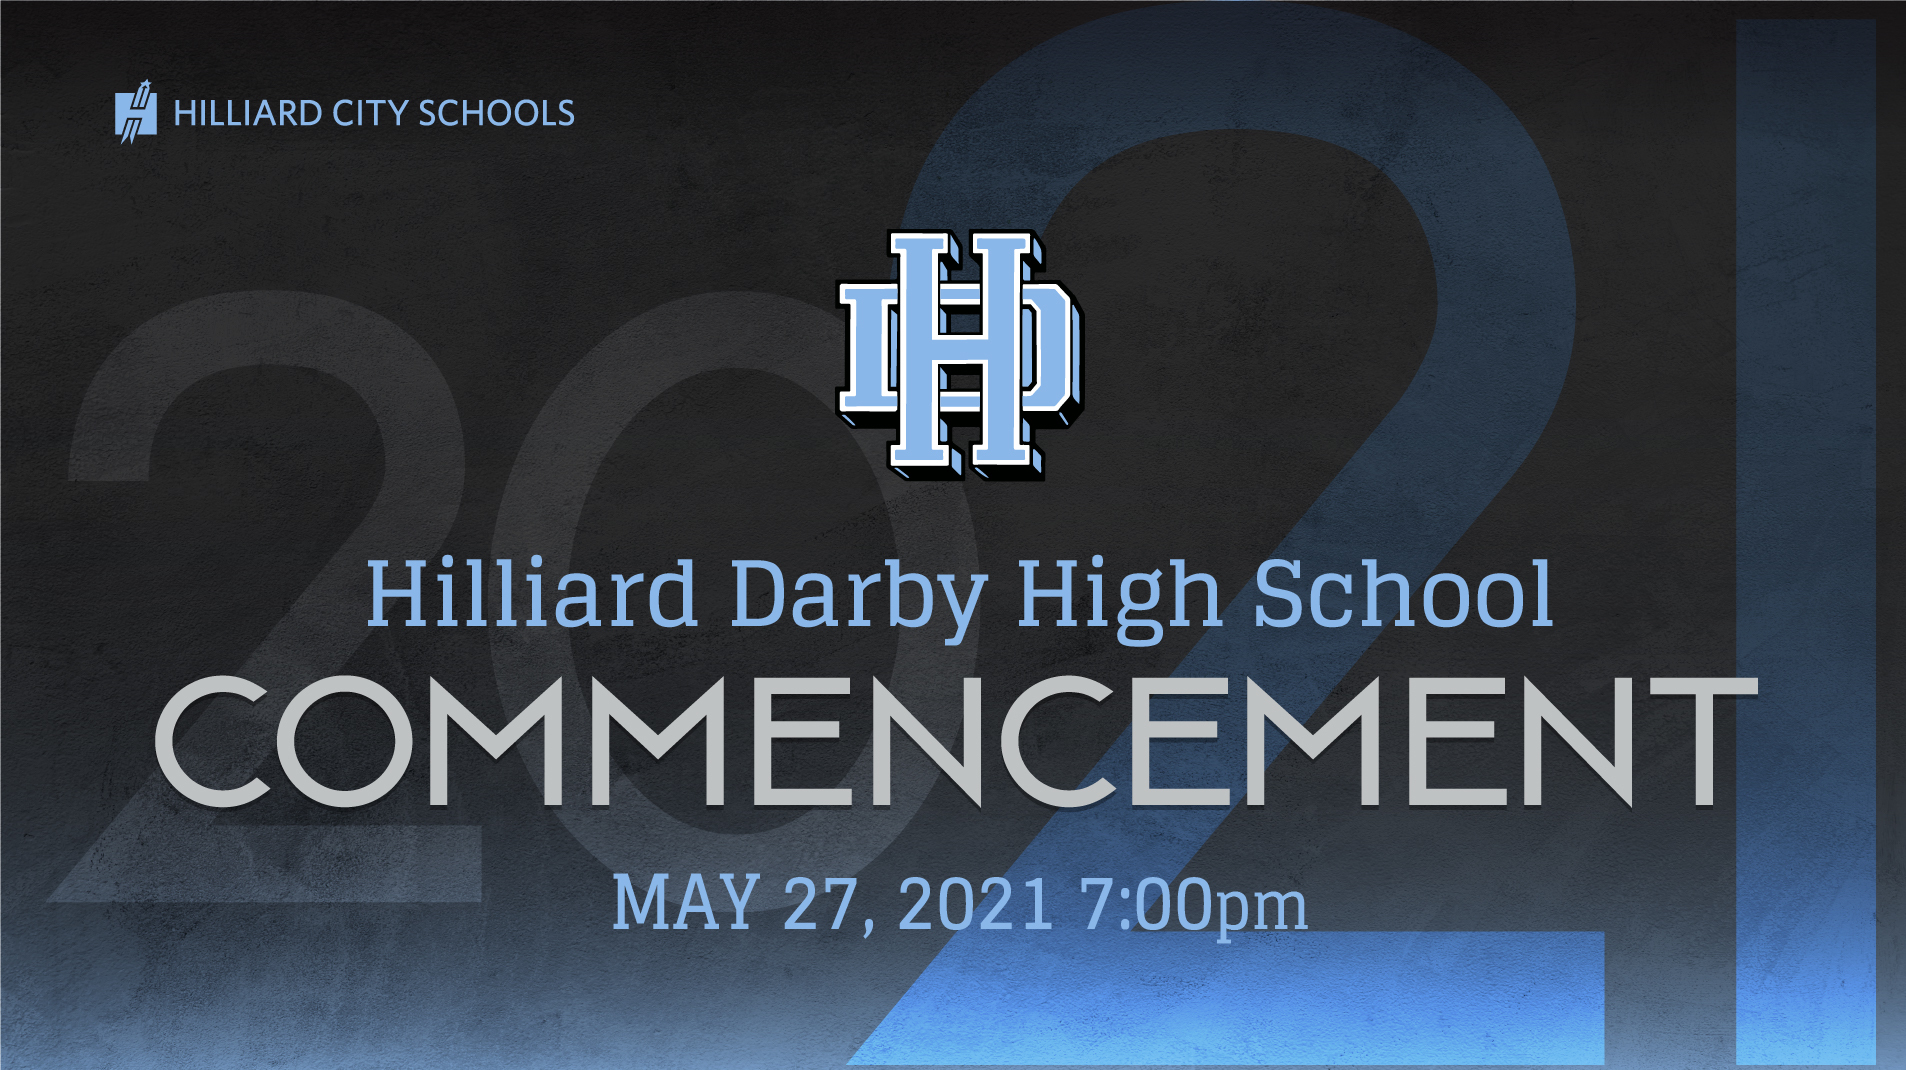 Hilliard Darby High School Commencement on Livestream